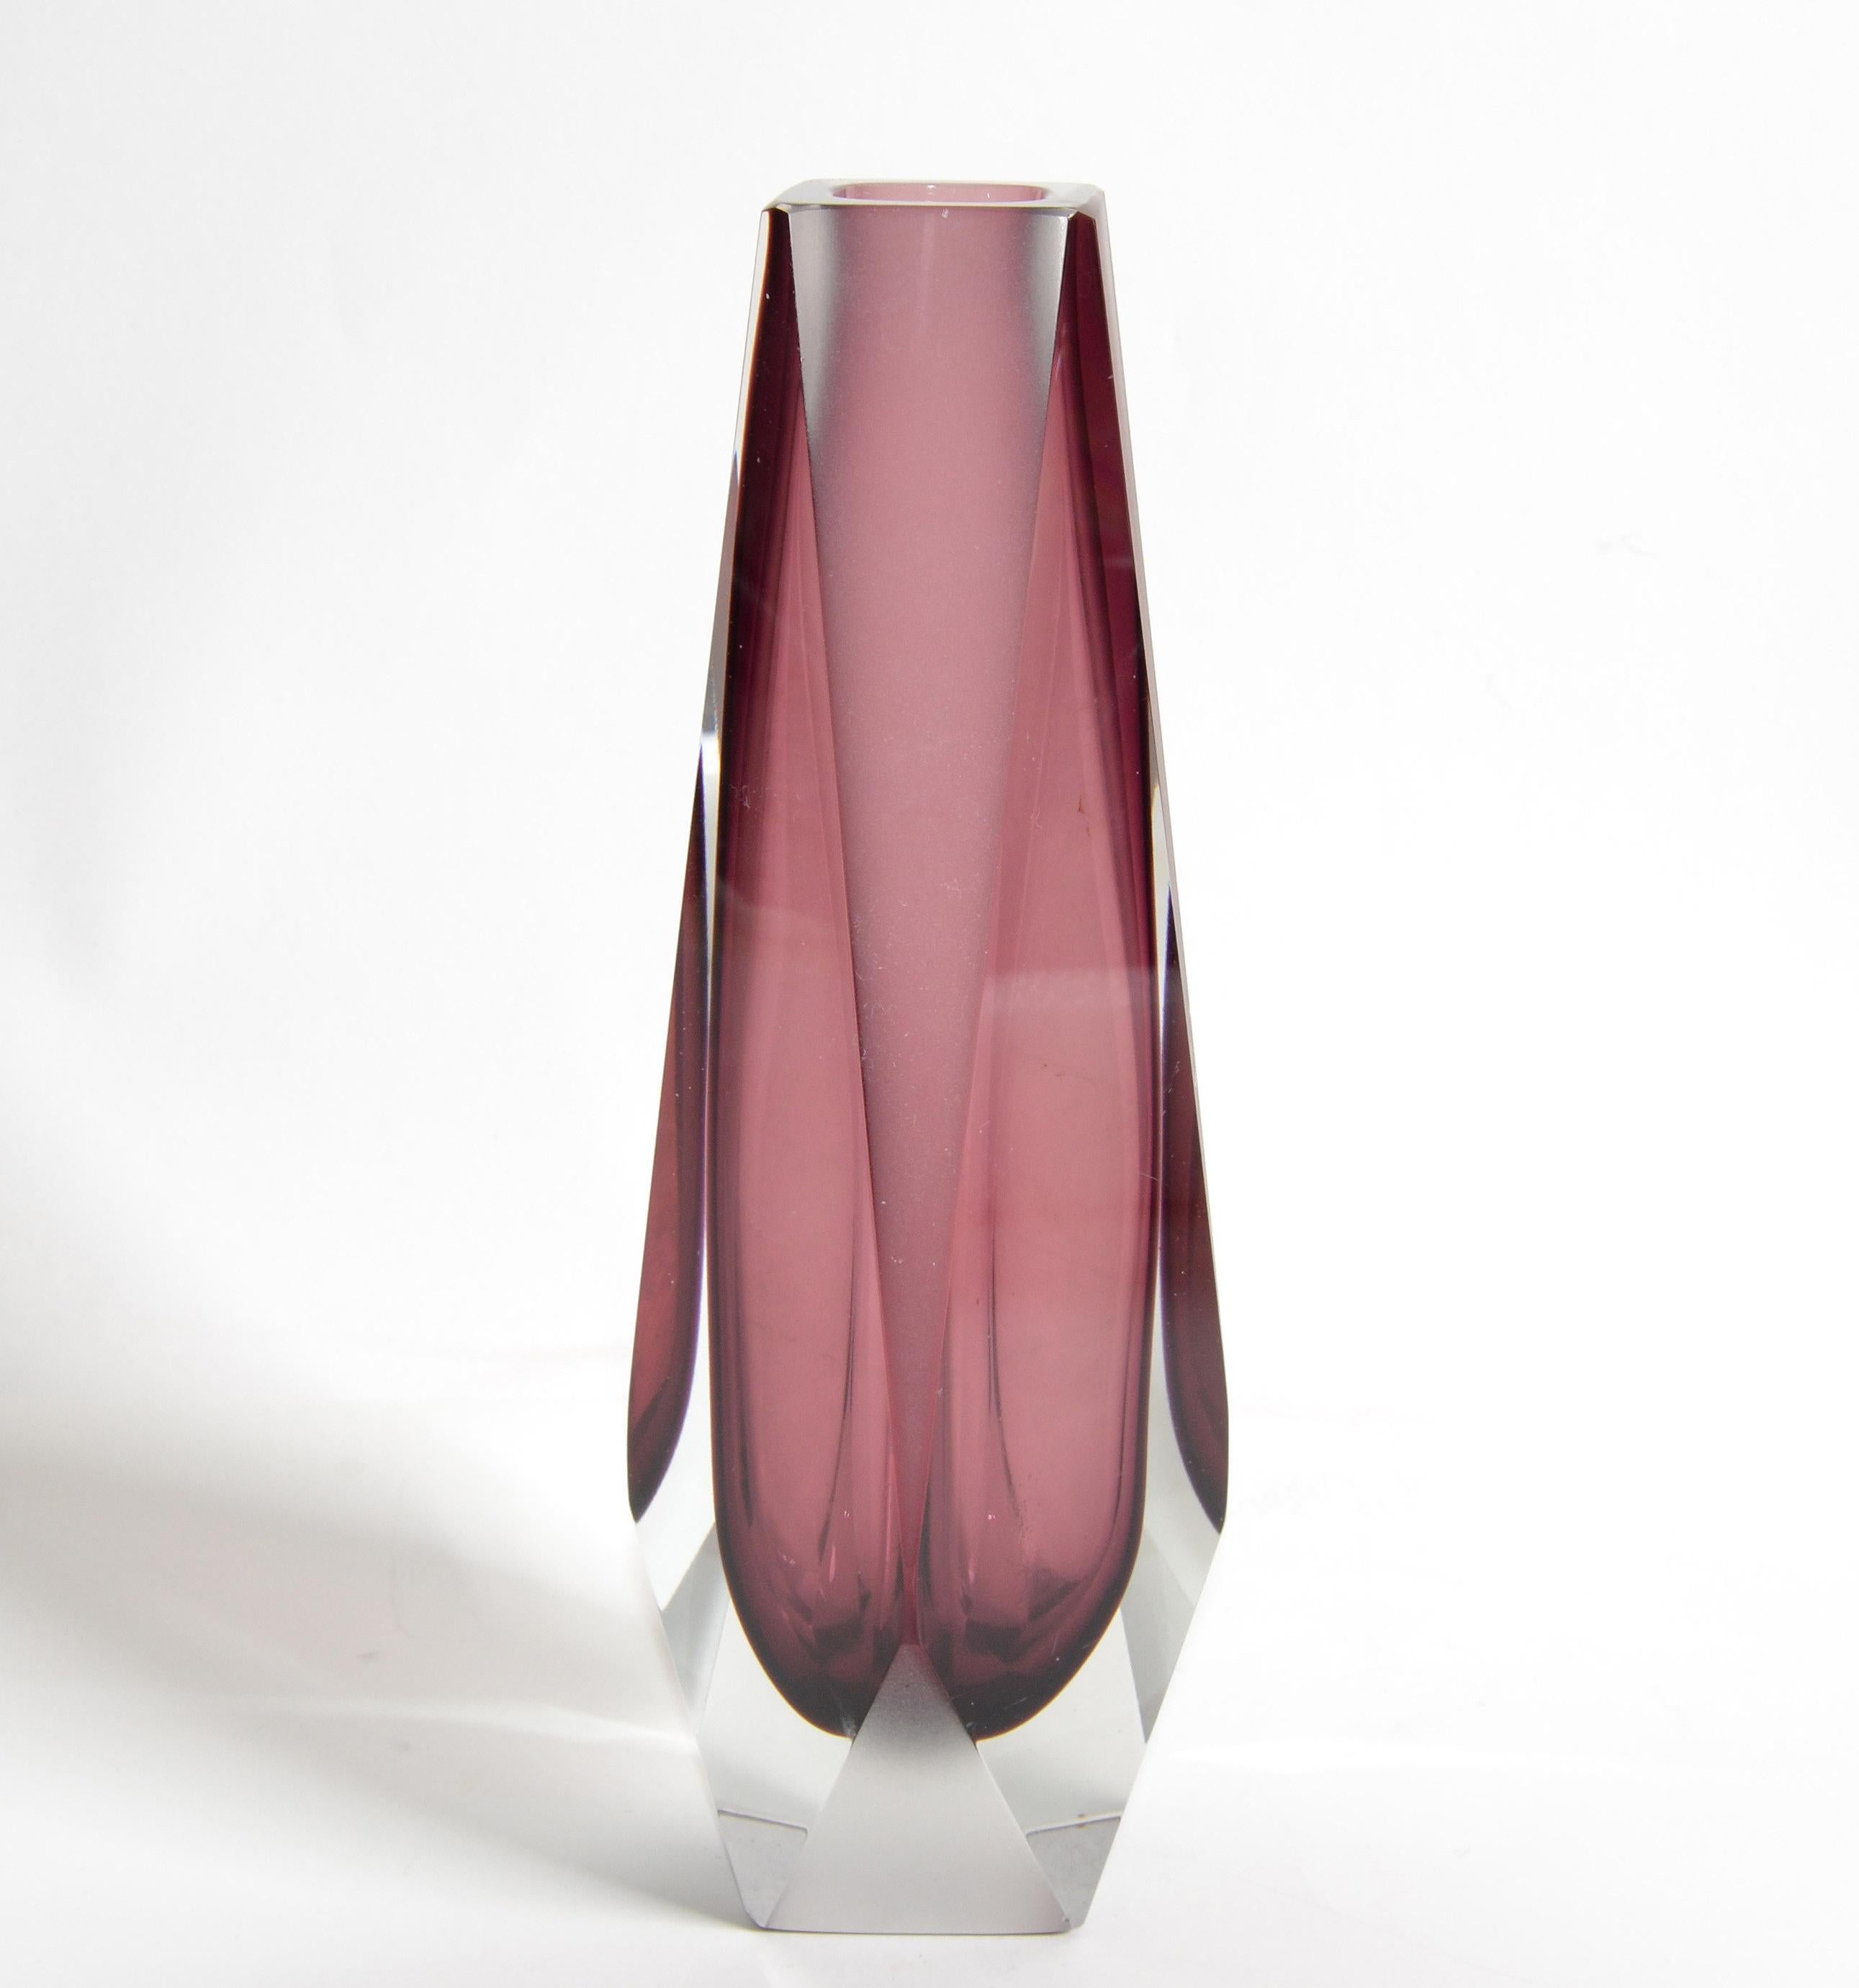 Stunning faceted Mid-Century Modern Murano glass Sommerso art glass vase made in Italy.
The purple, clear and frosted glass color combination looks amazing from any angle.
No markings.